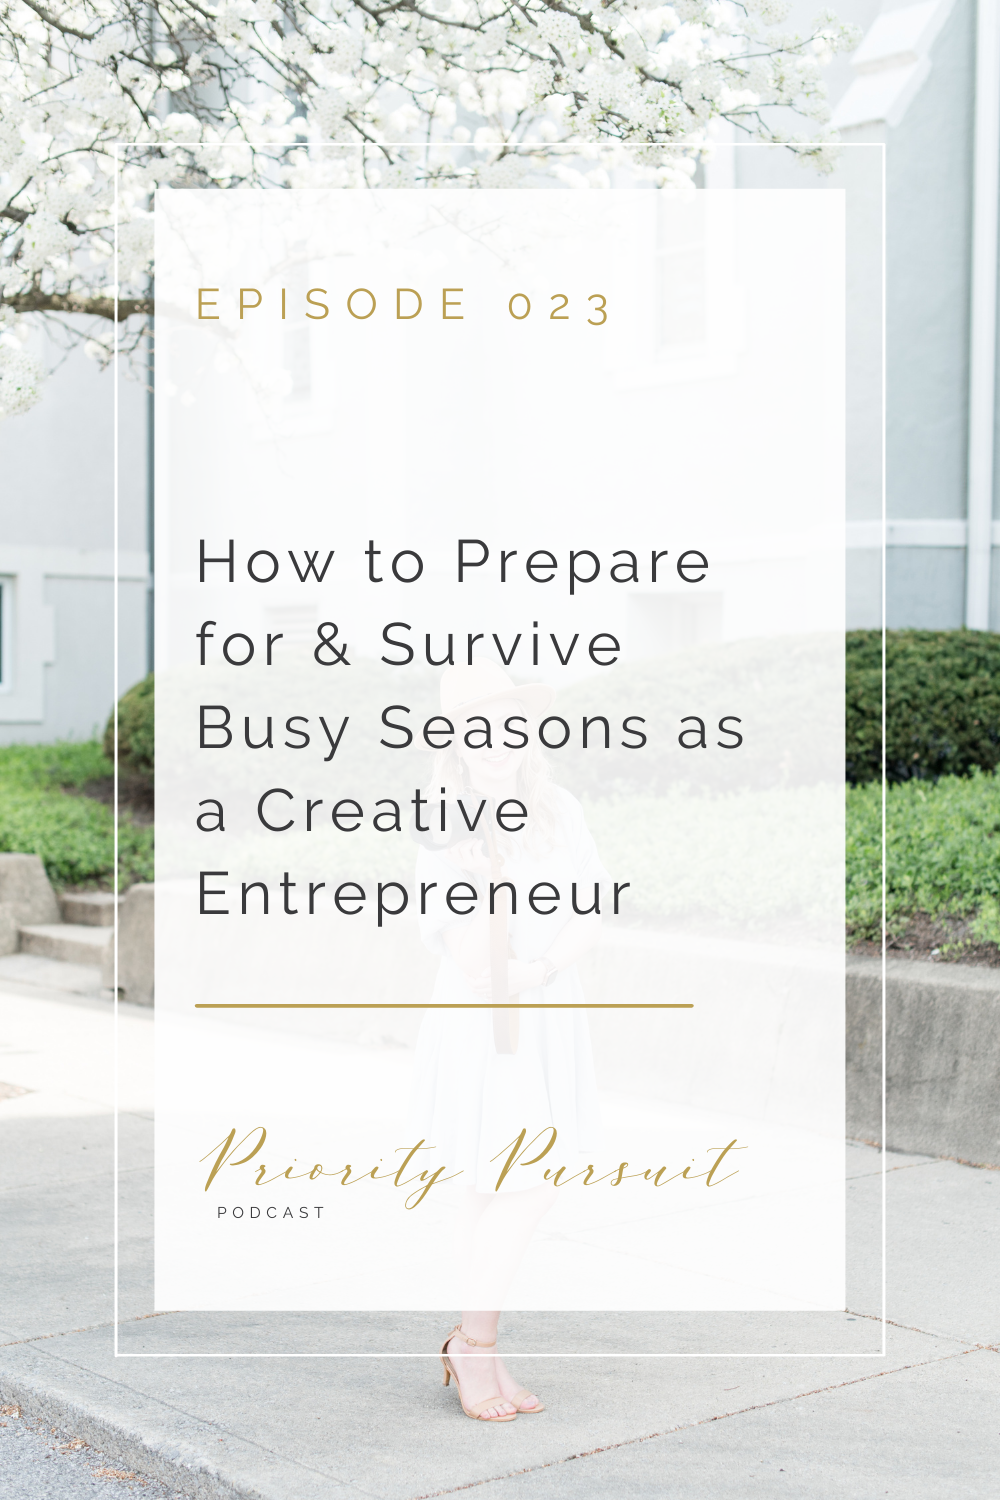 Victoria Rayburn explains how to how to prepare for and survive busy seasons as a creative entrepreneur in this episode of “Priority Pursuit.”